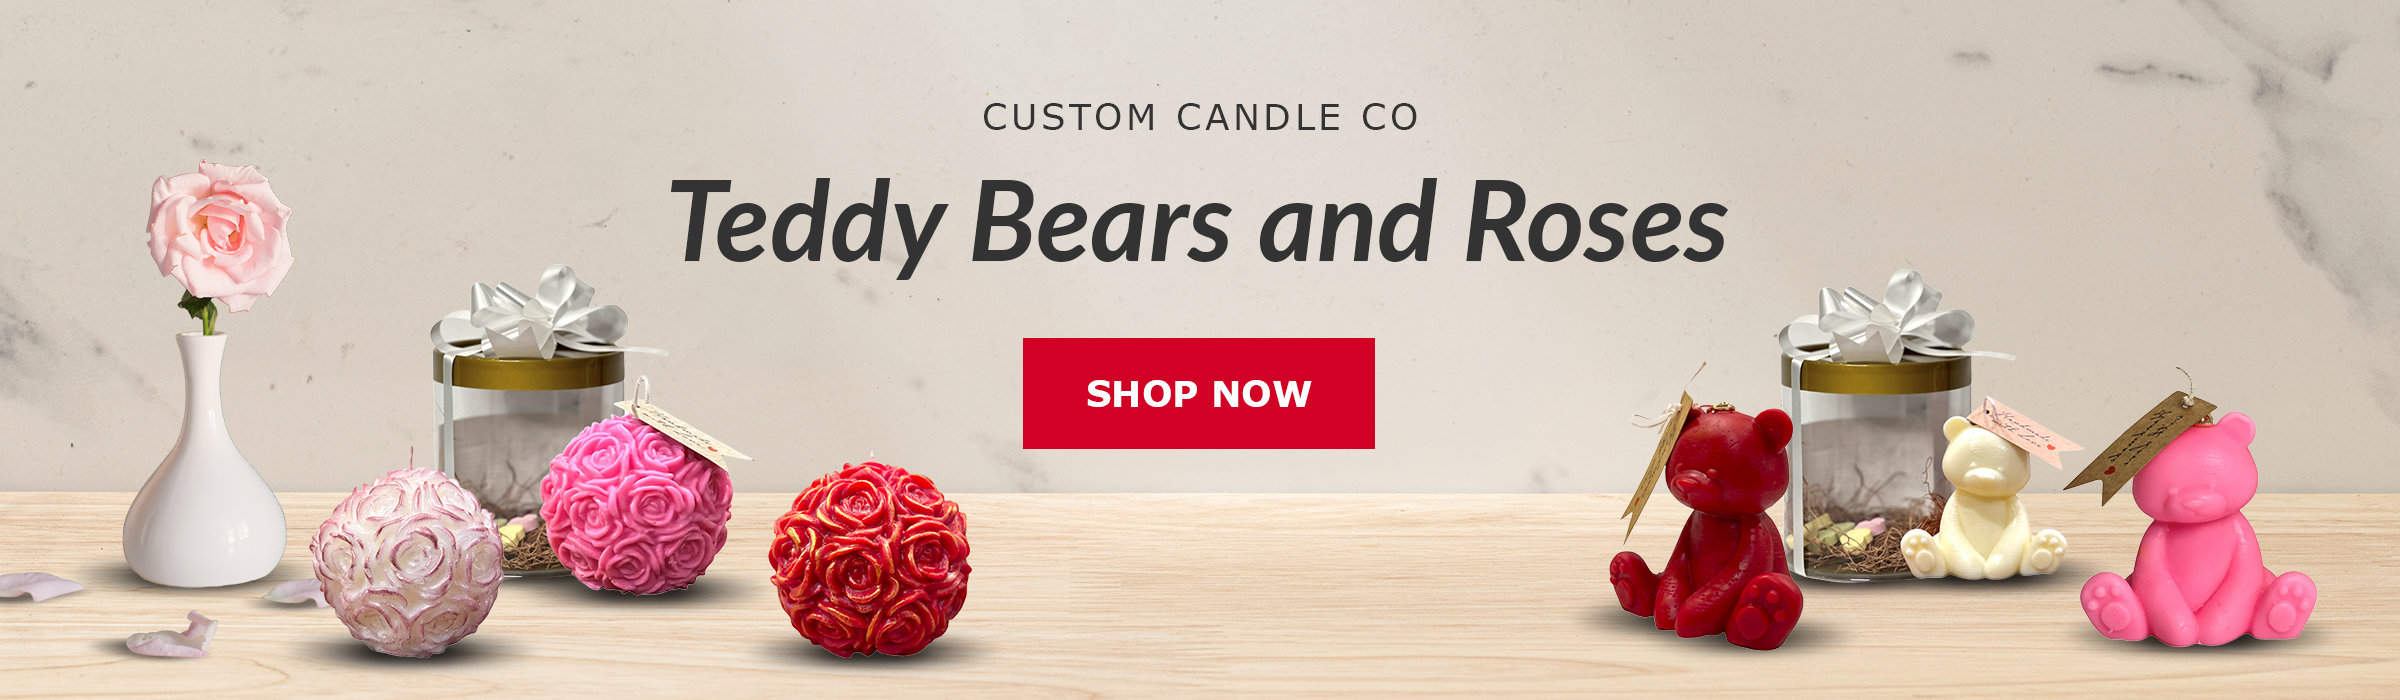 Custom candle co Mother's Day teddy bears and roses.